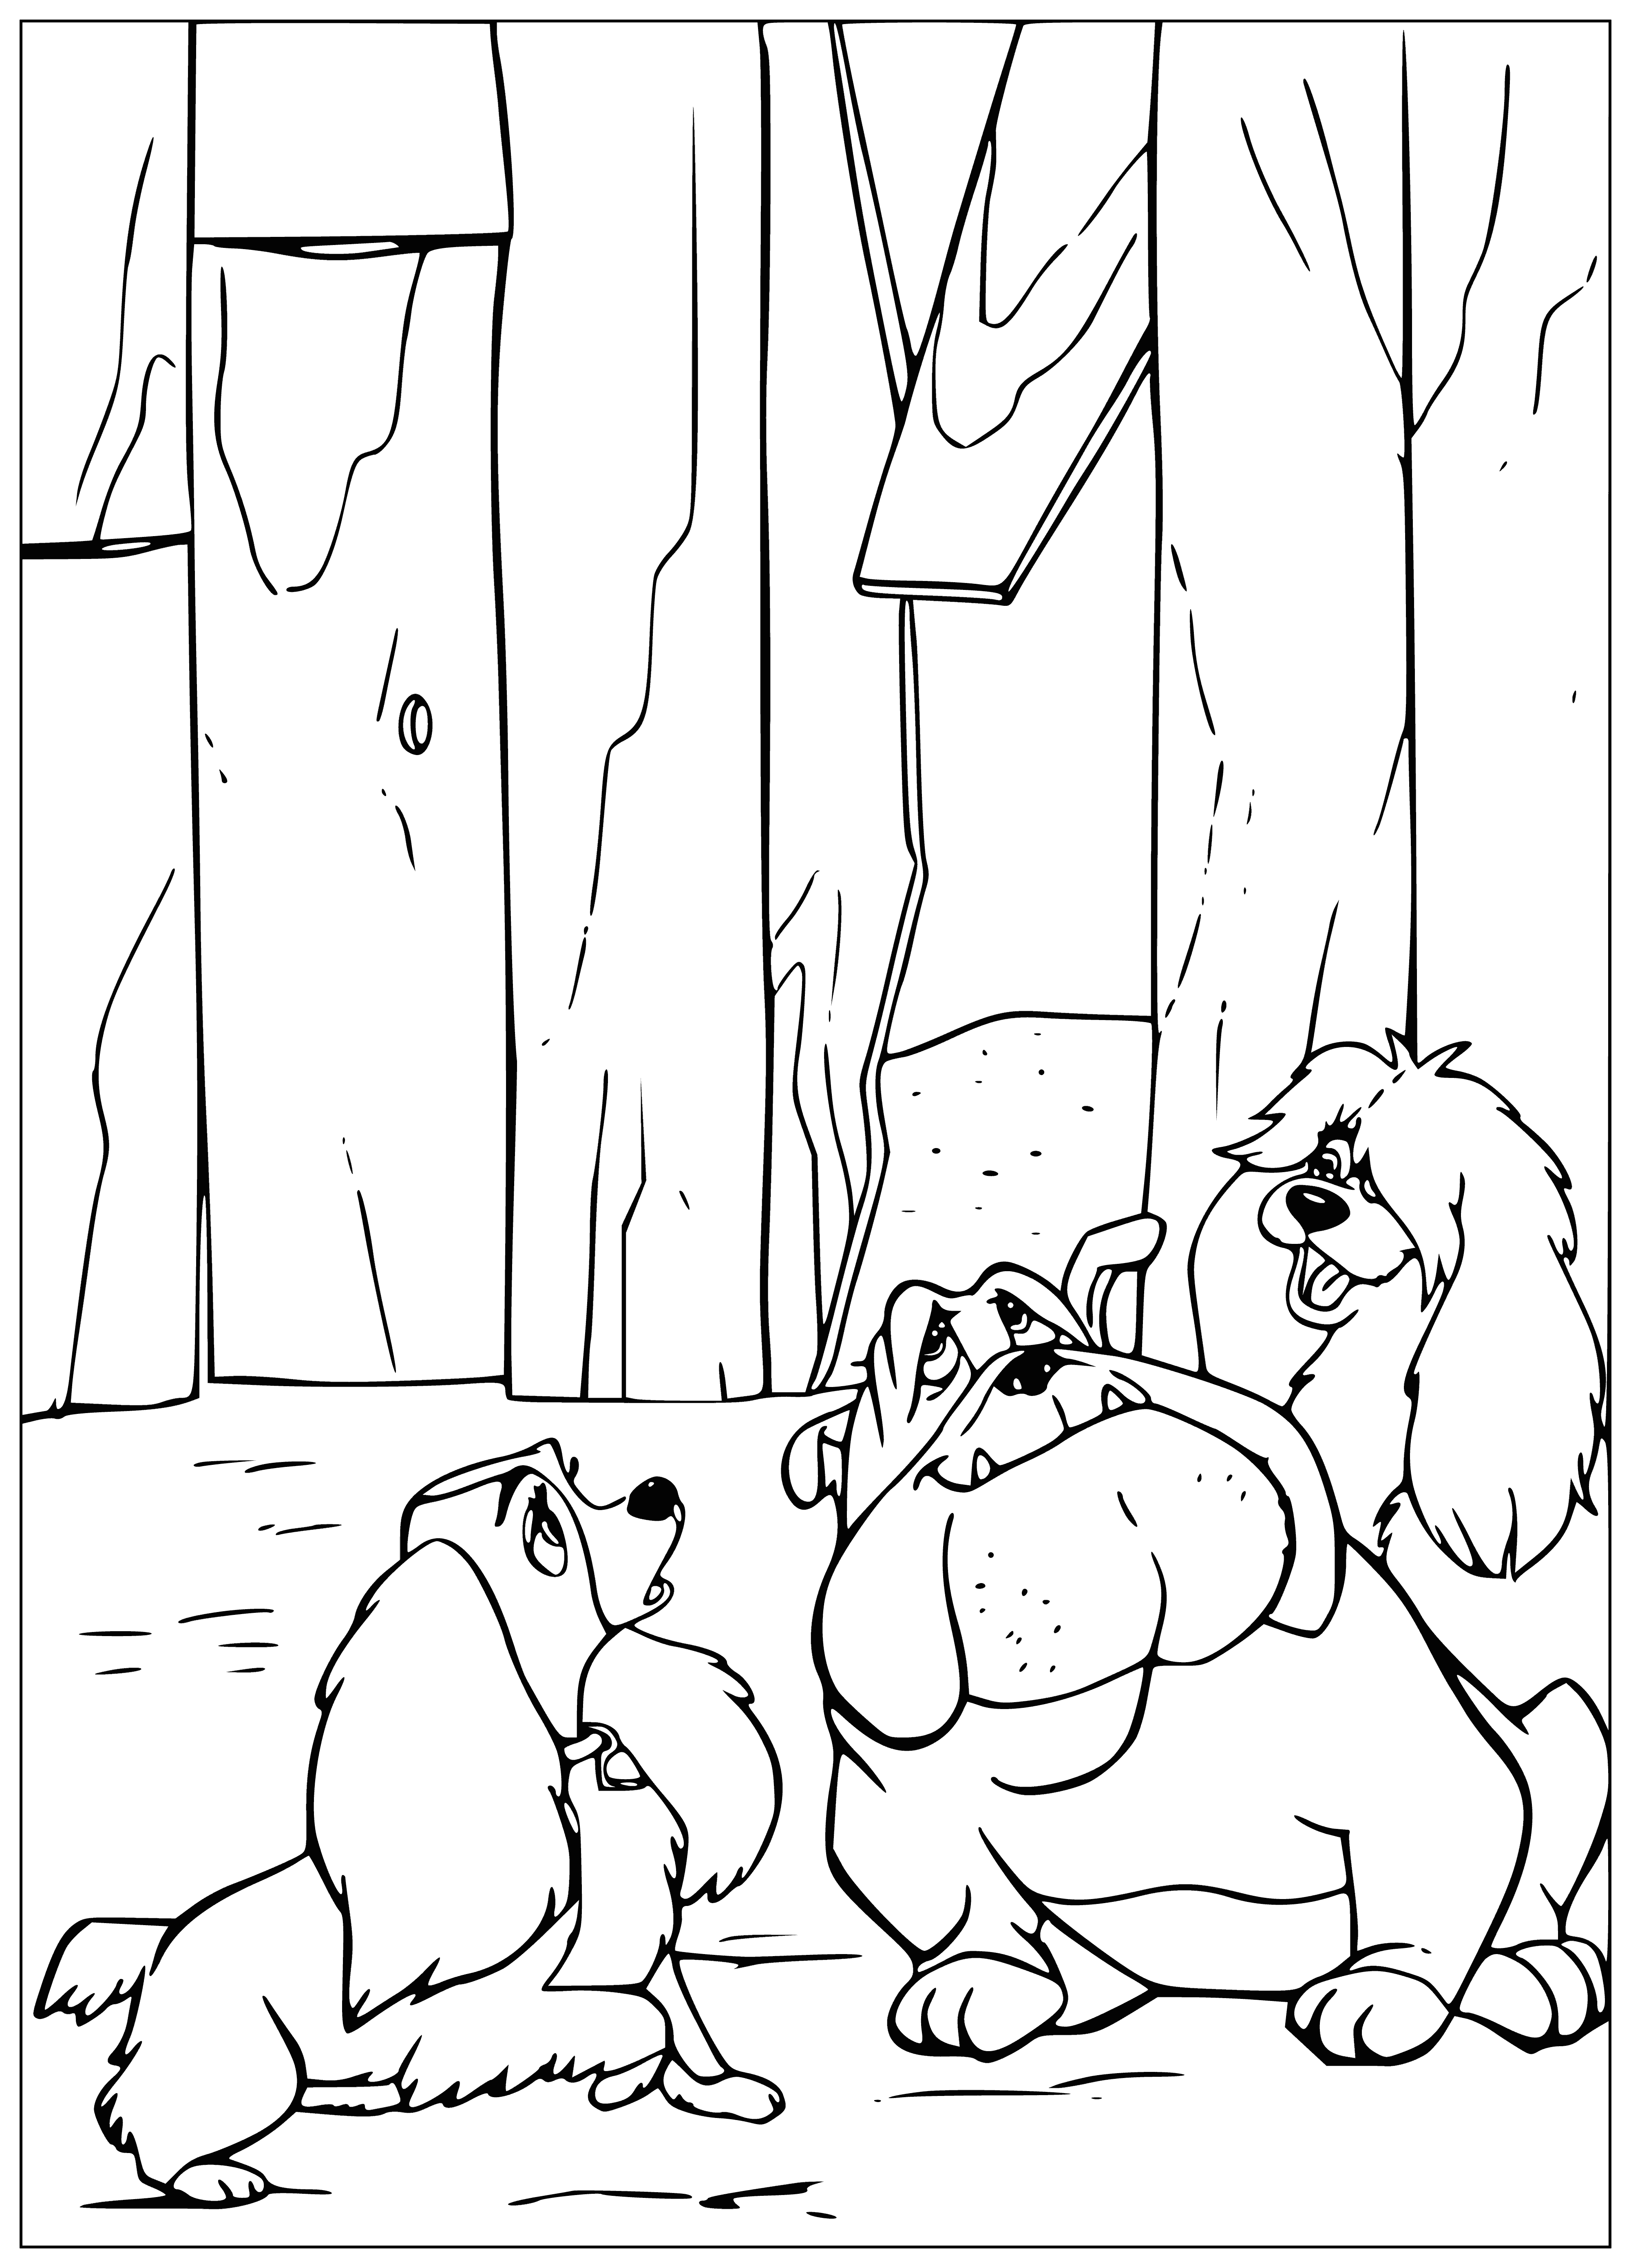 Stray dogs coloring page